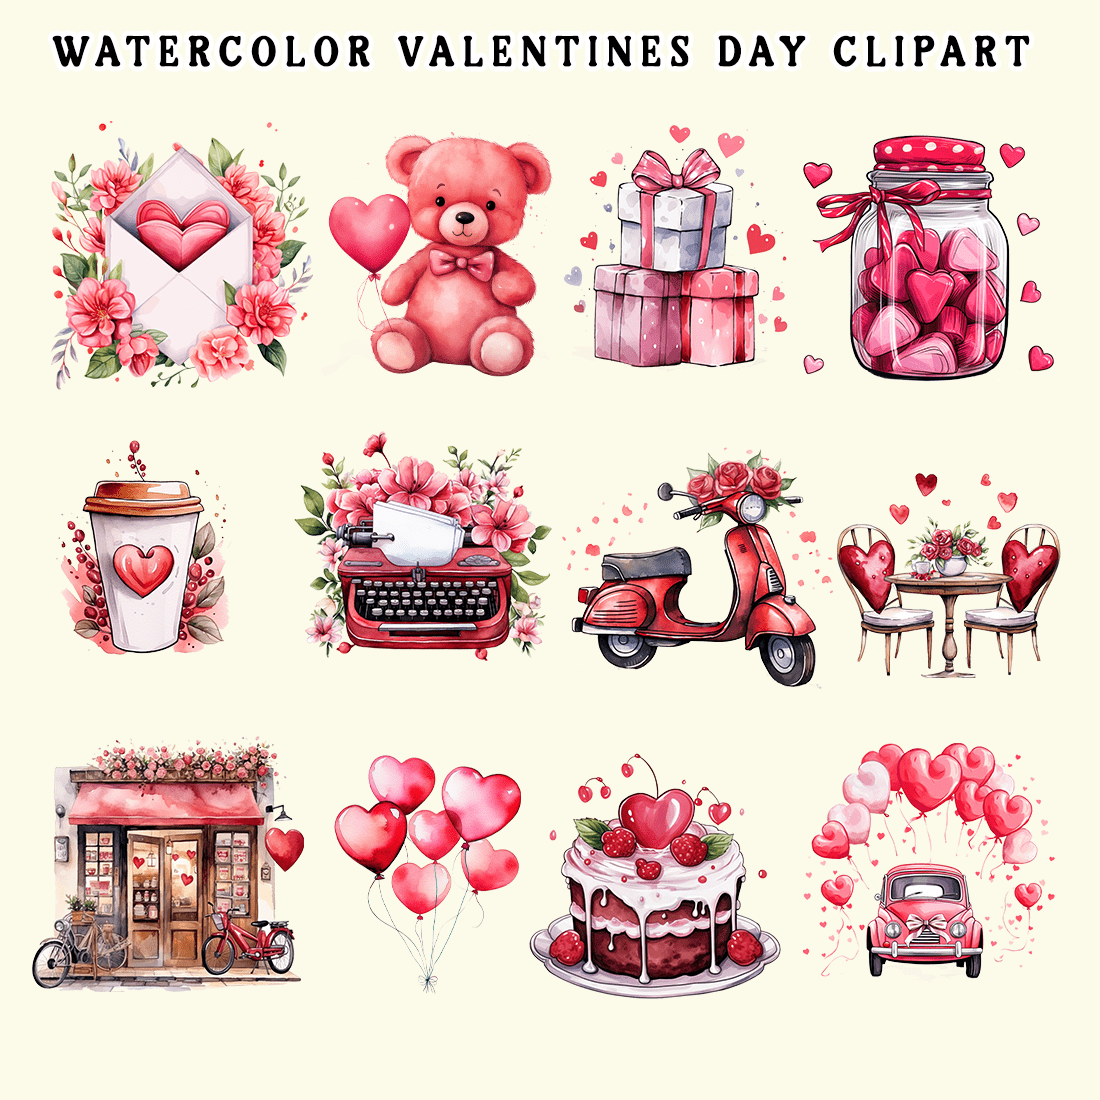 Watercolor Valentines Day Clipart preview image.